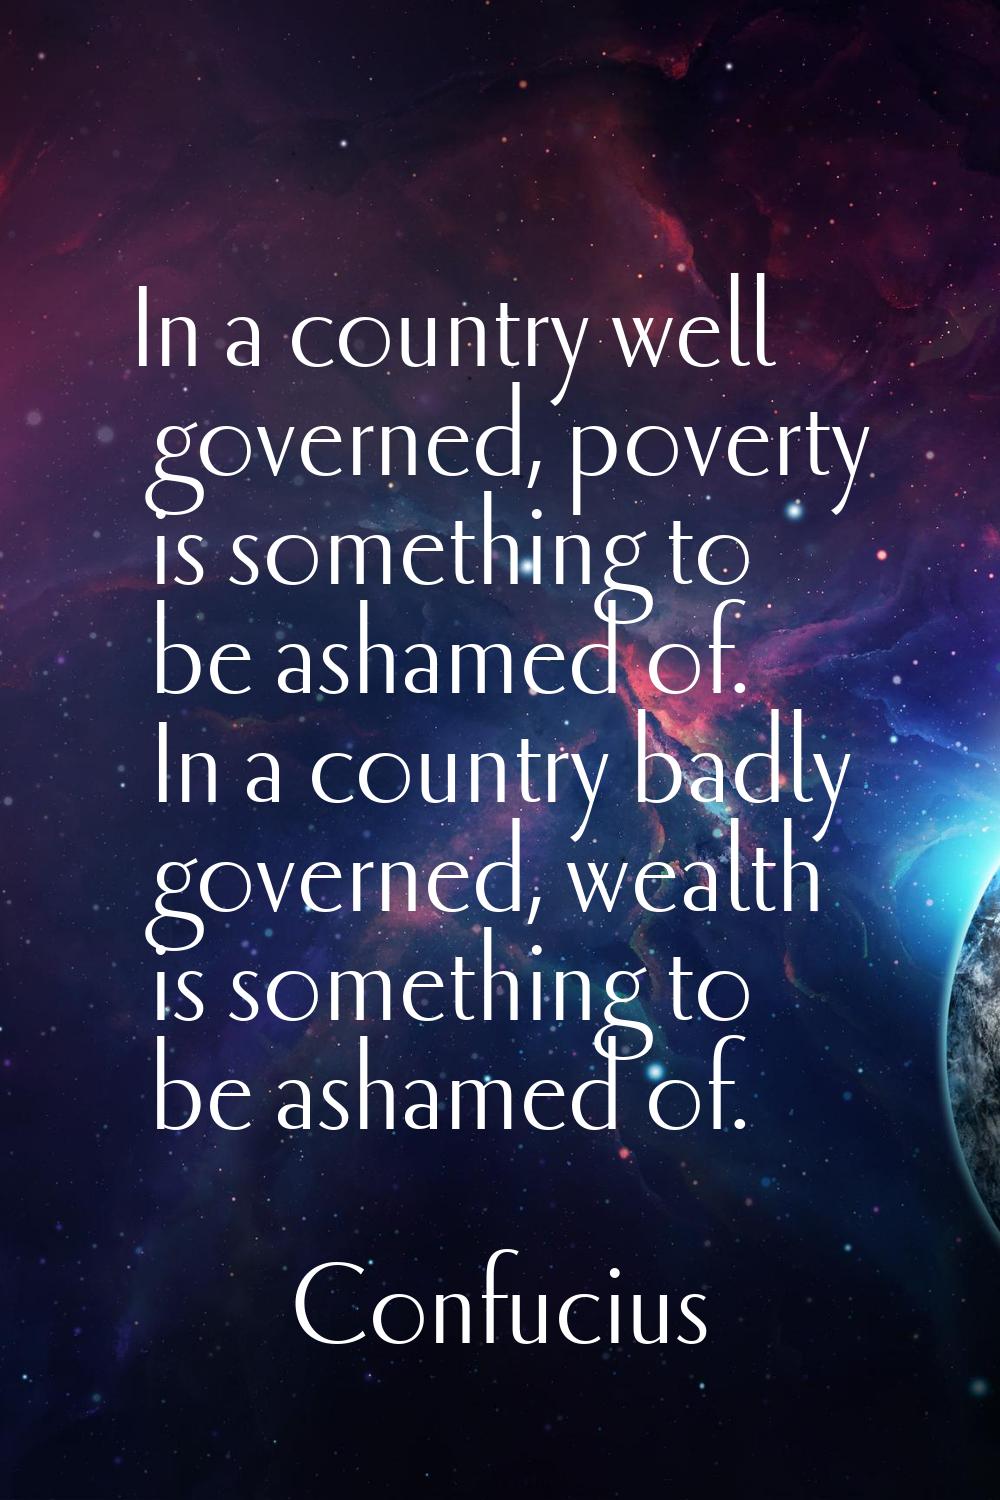 In a country well governed, poverty is something to be ashamed of. In a country badly governed, wea